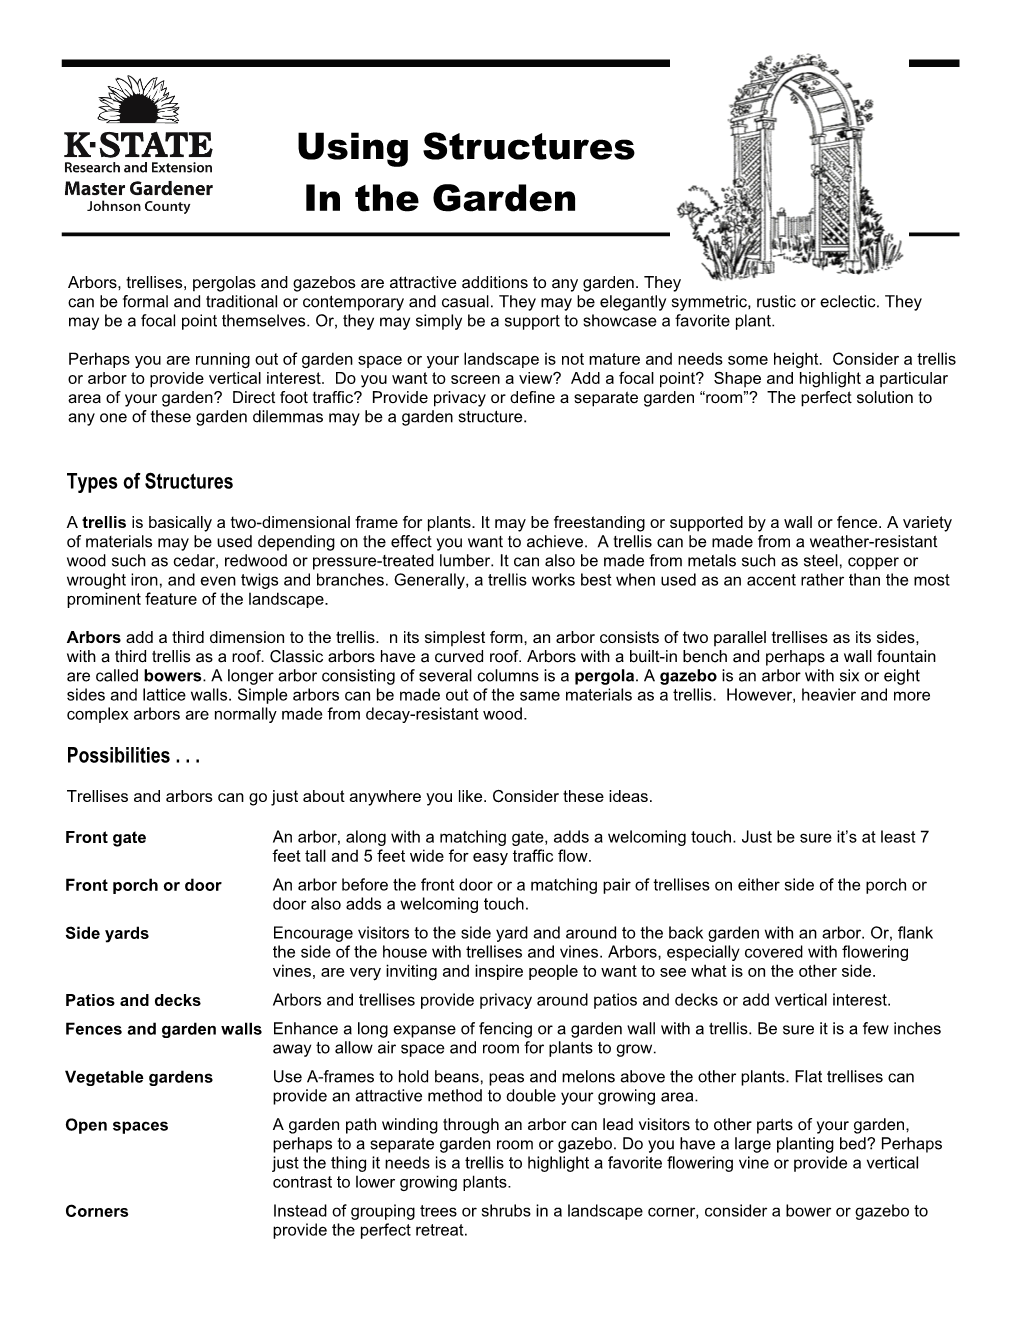 Using Structures in the Garden